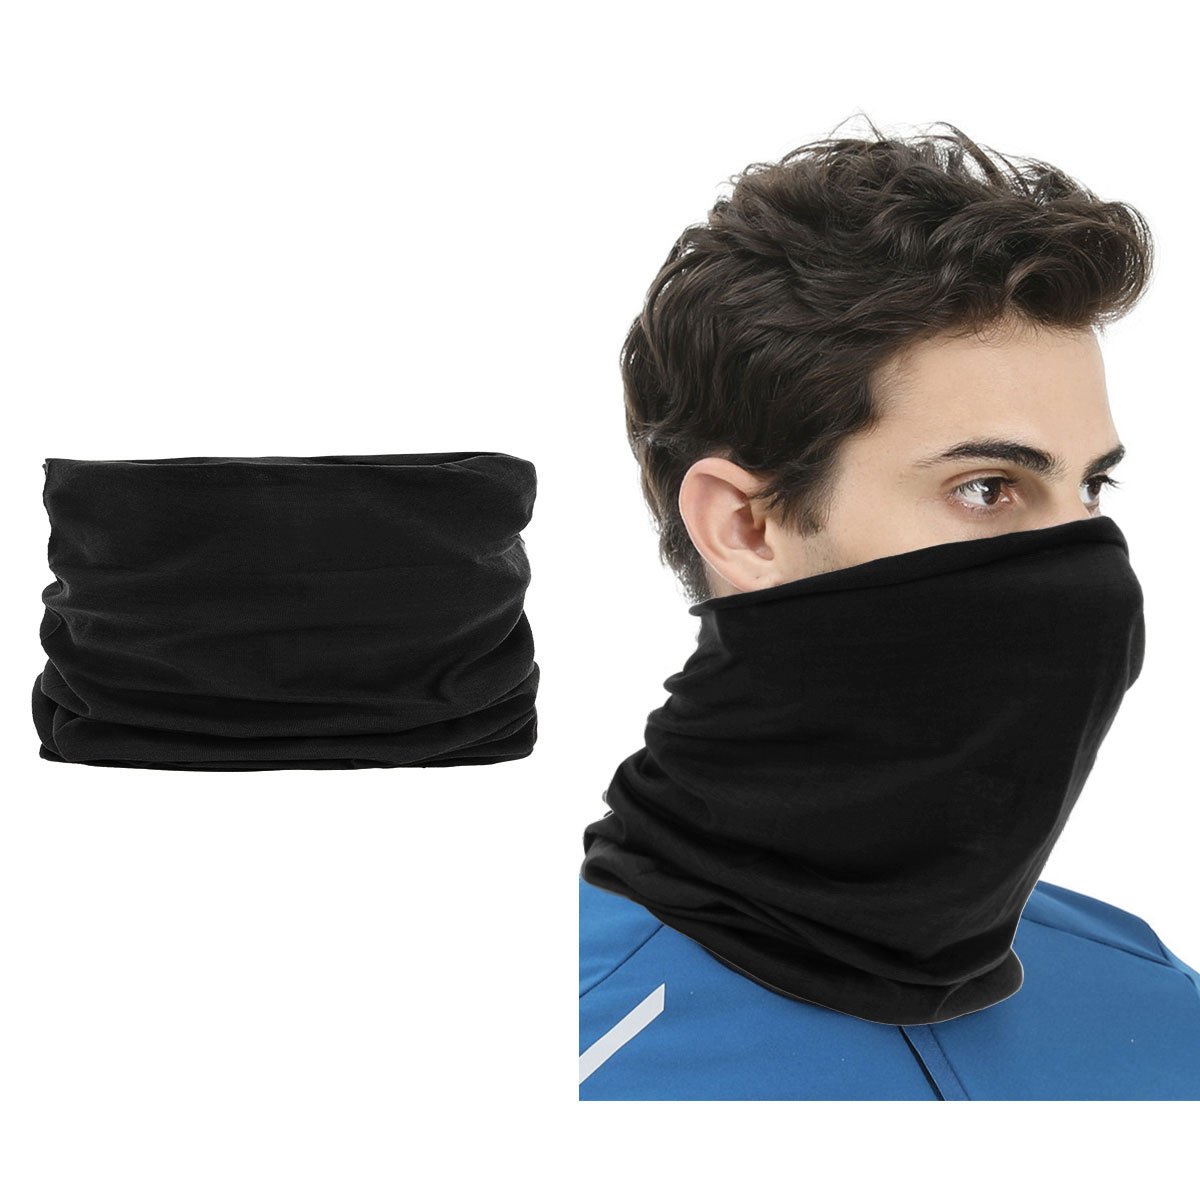 2 pieces Multi-functional Polyester Cowl Neck Scarf  - Bandana - Balaclava - Ideal for Sports Cycling Motorbike - Unisex - Black-1